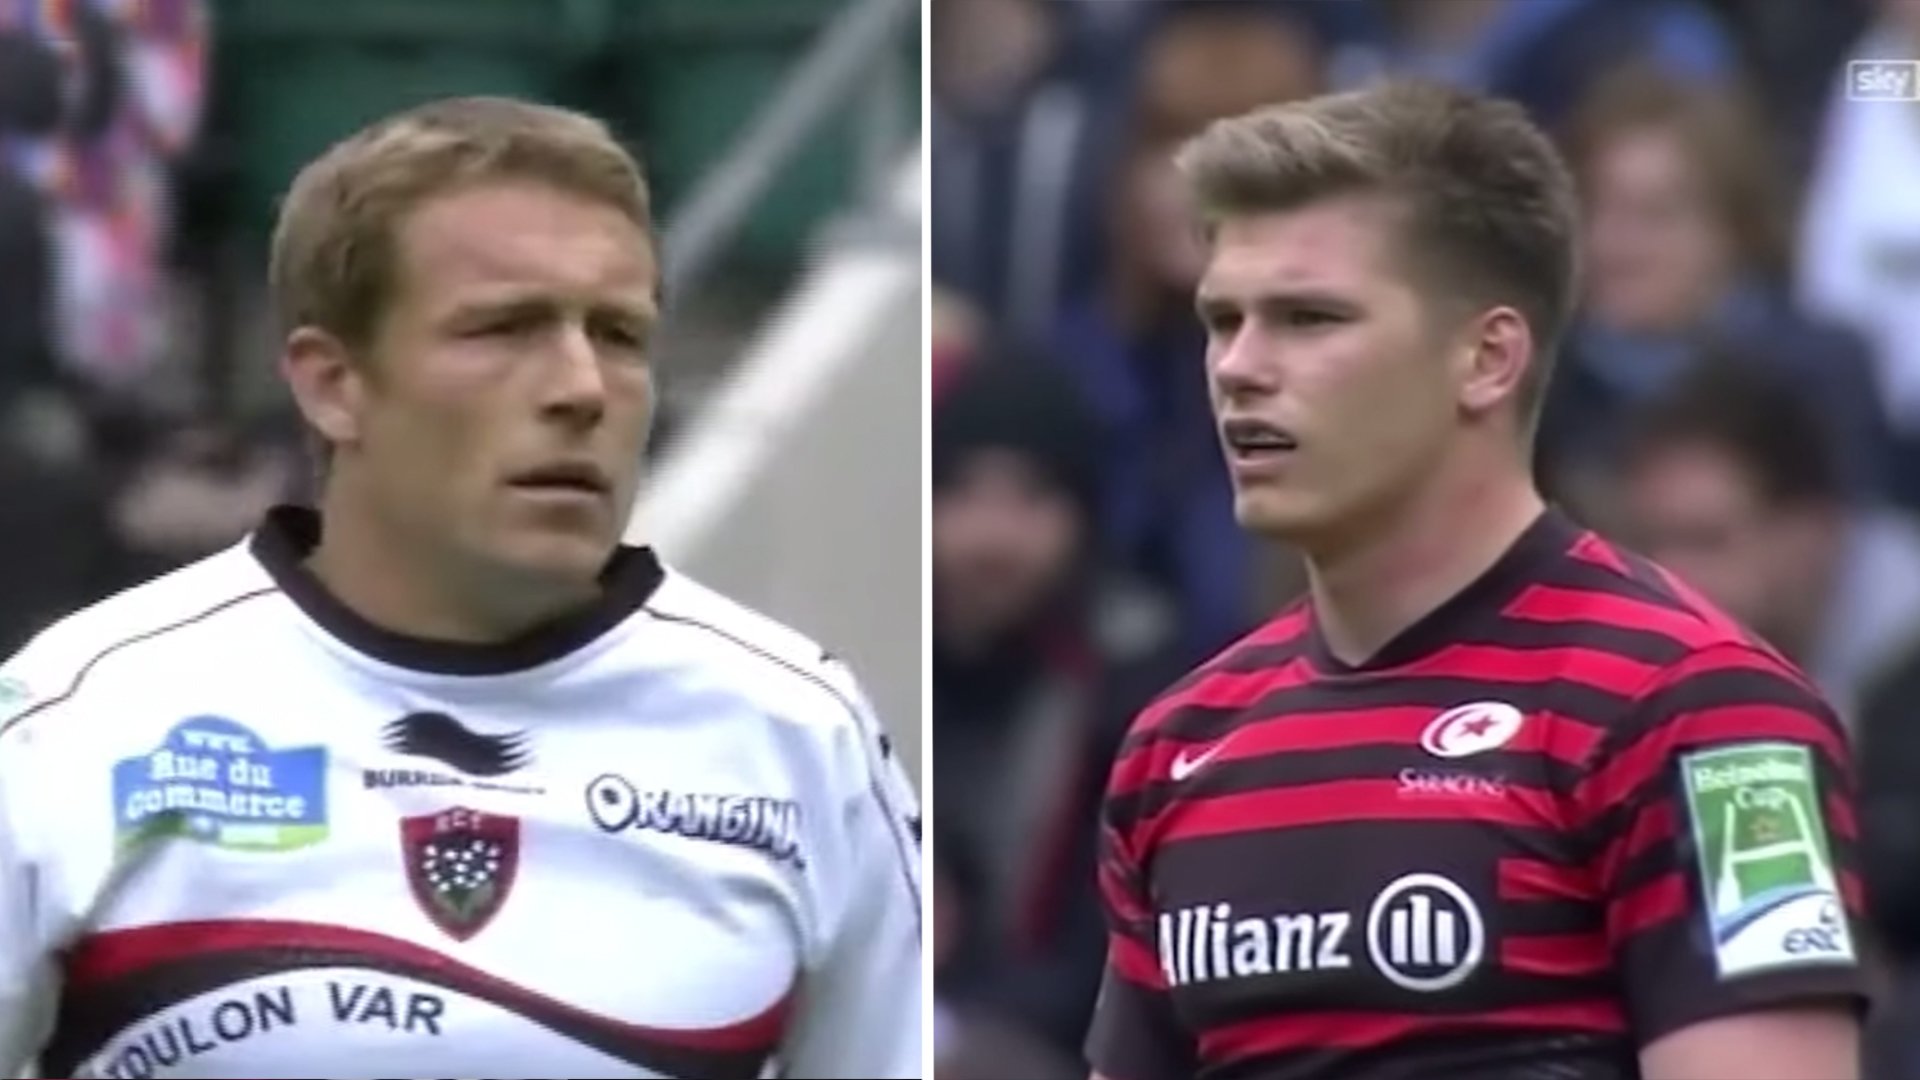 Toulon have just released full footage of the moment when Jonny Wilkinson put Farrell back in his place